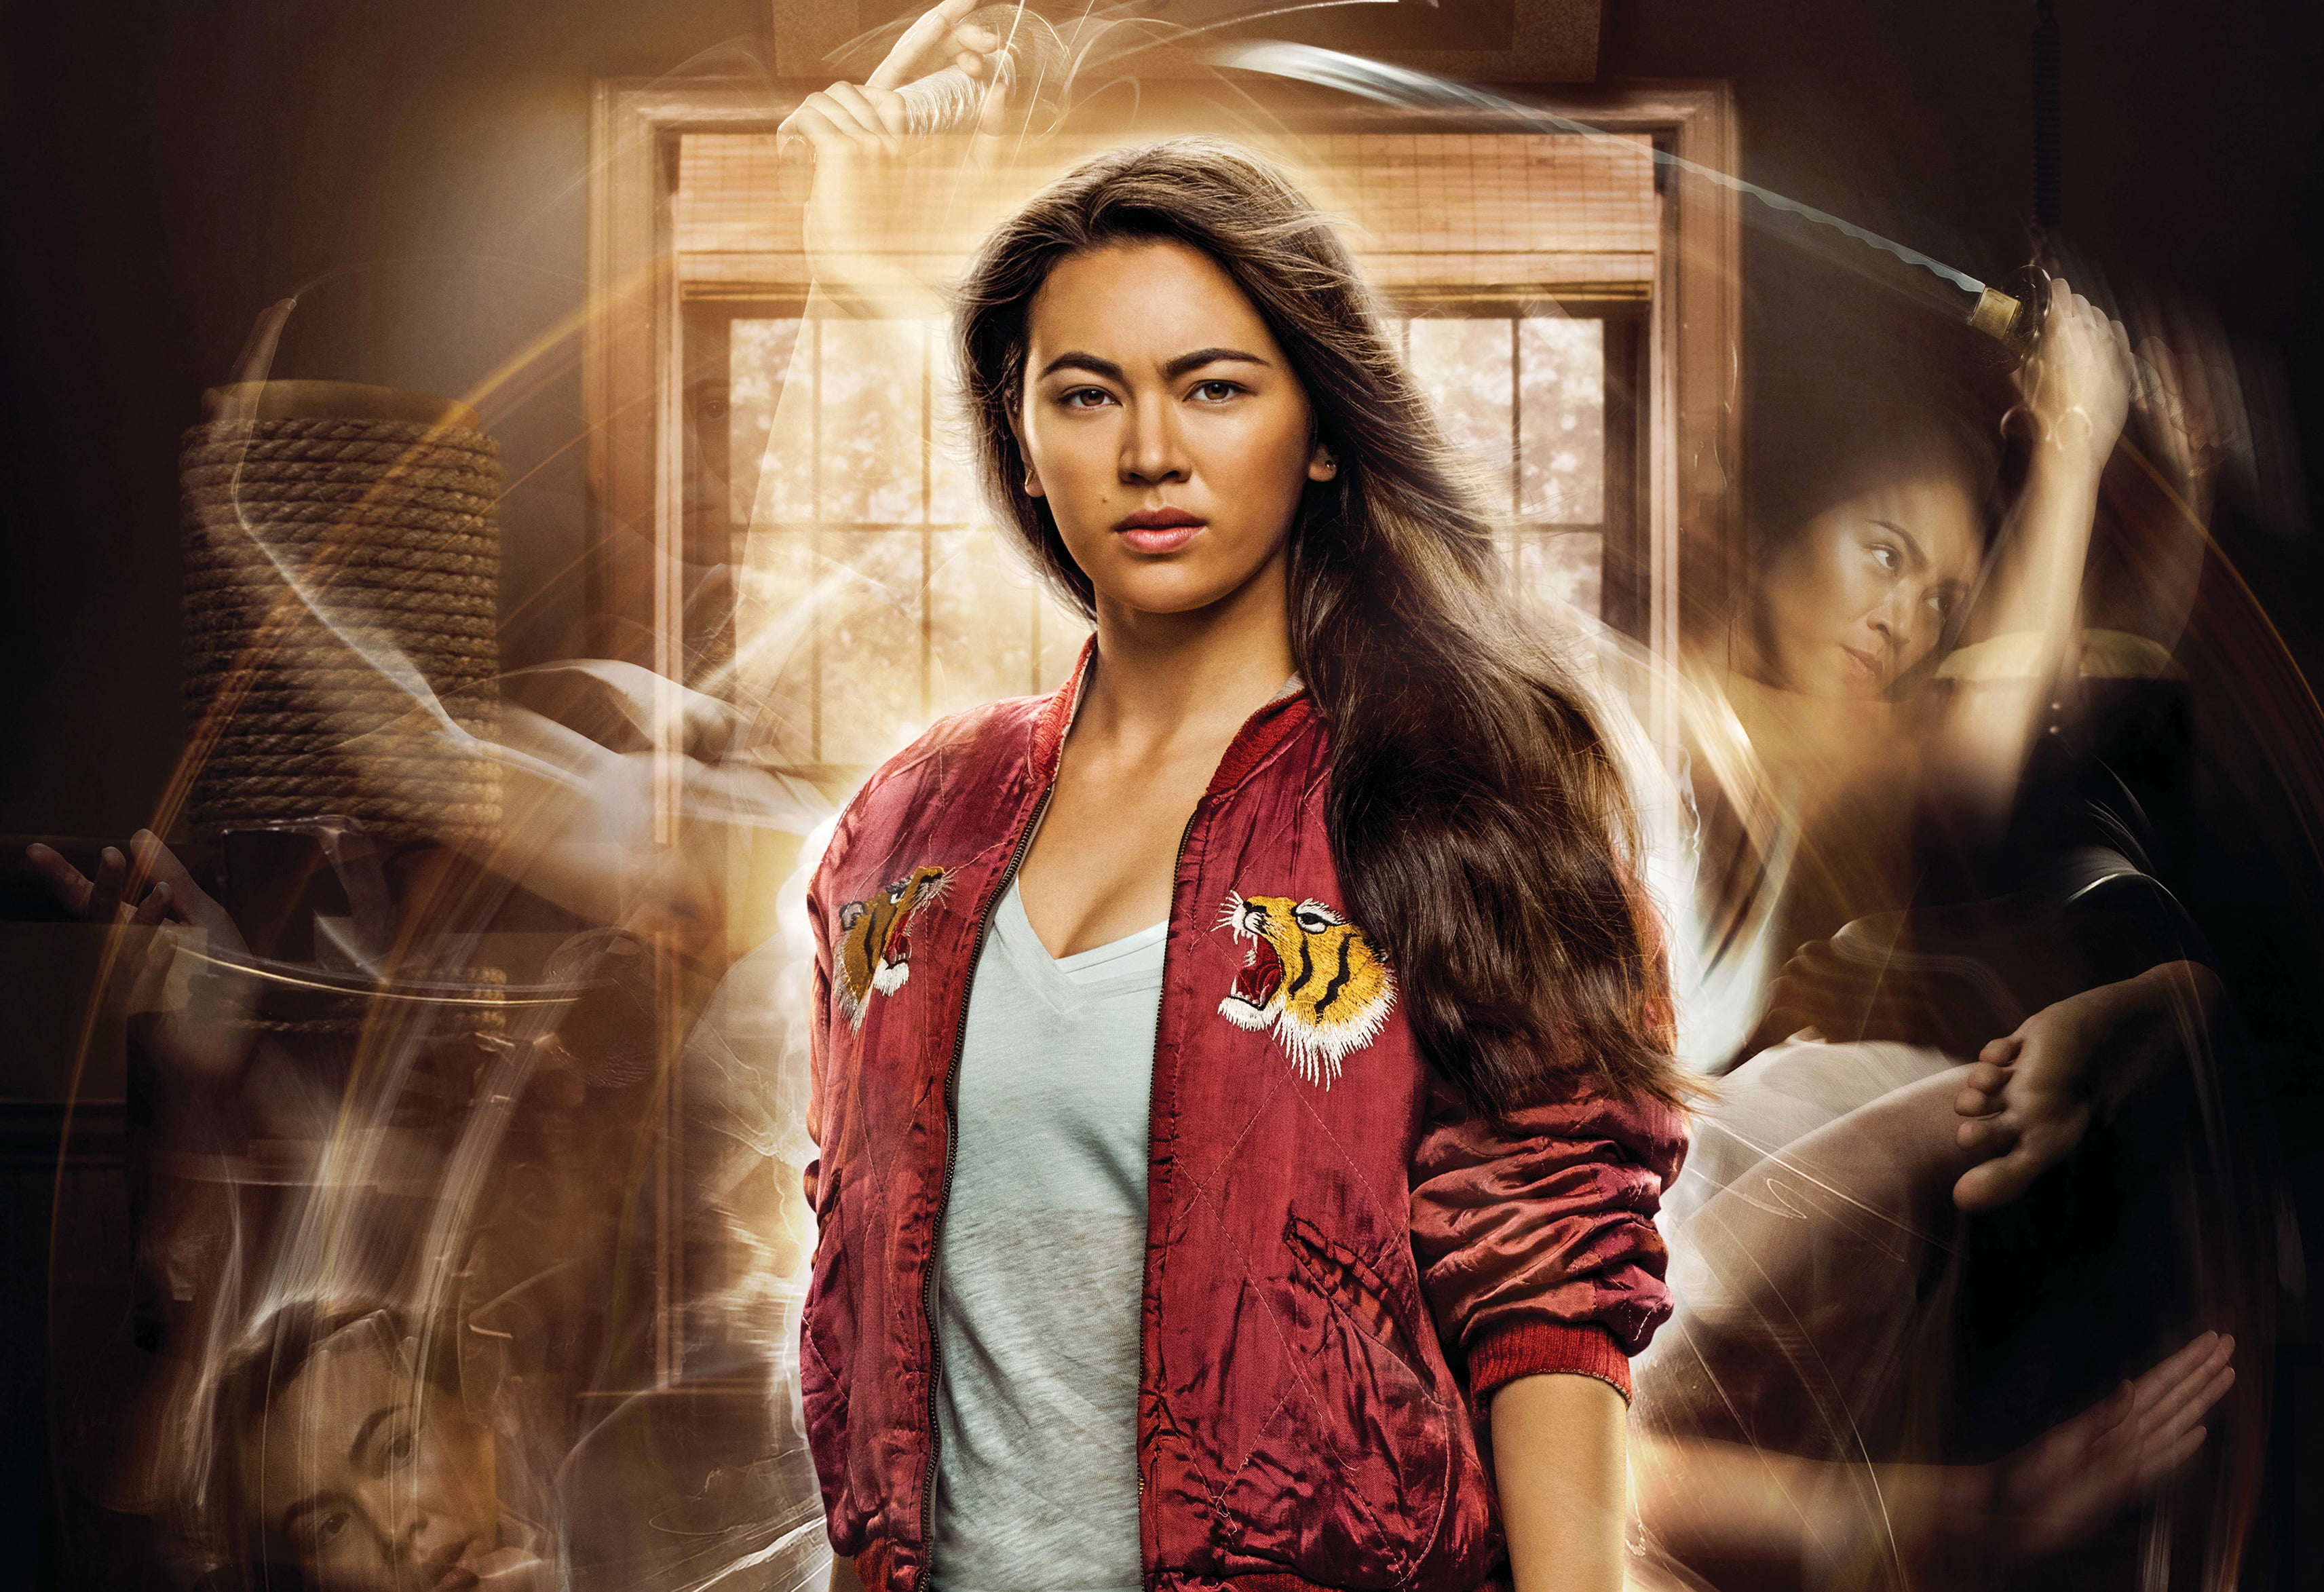 iron fist, tv shows, hd, 4k, jessica henwick, young adult, women